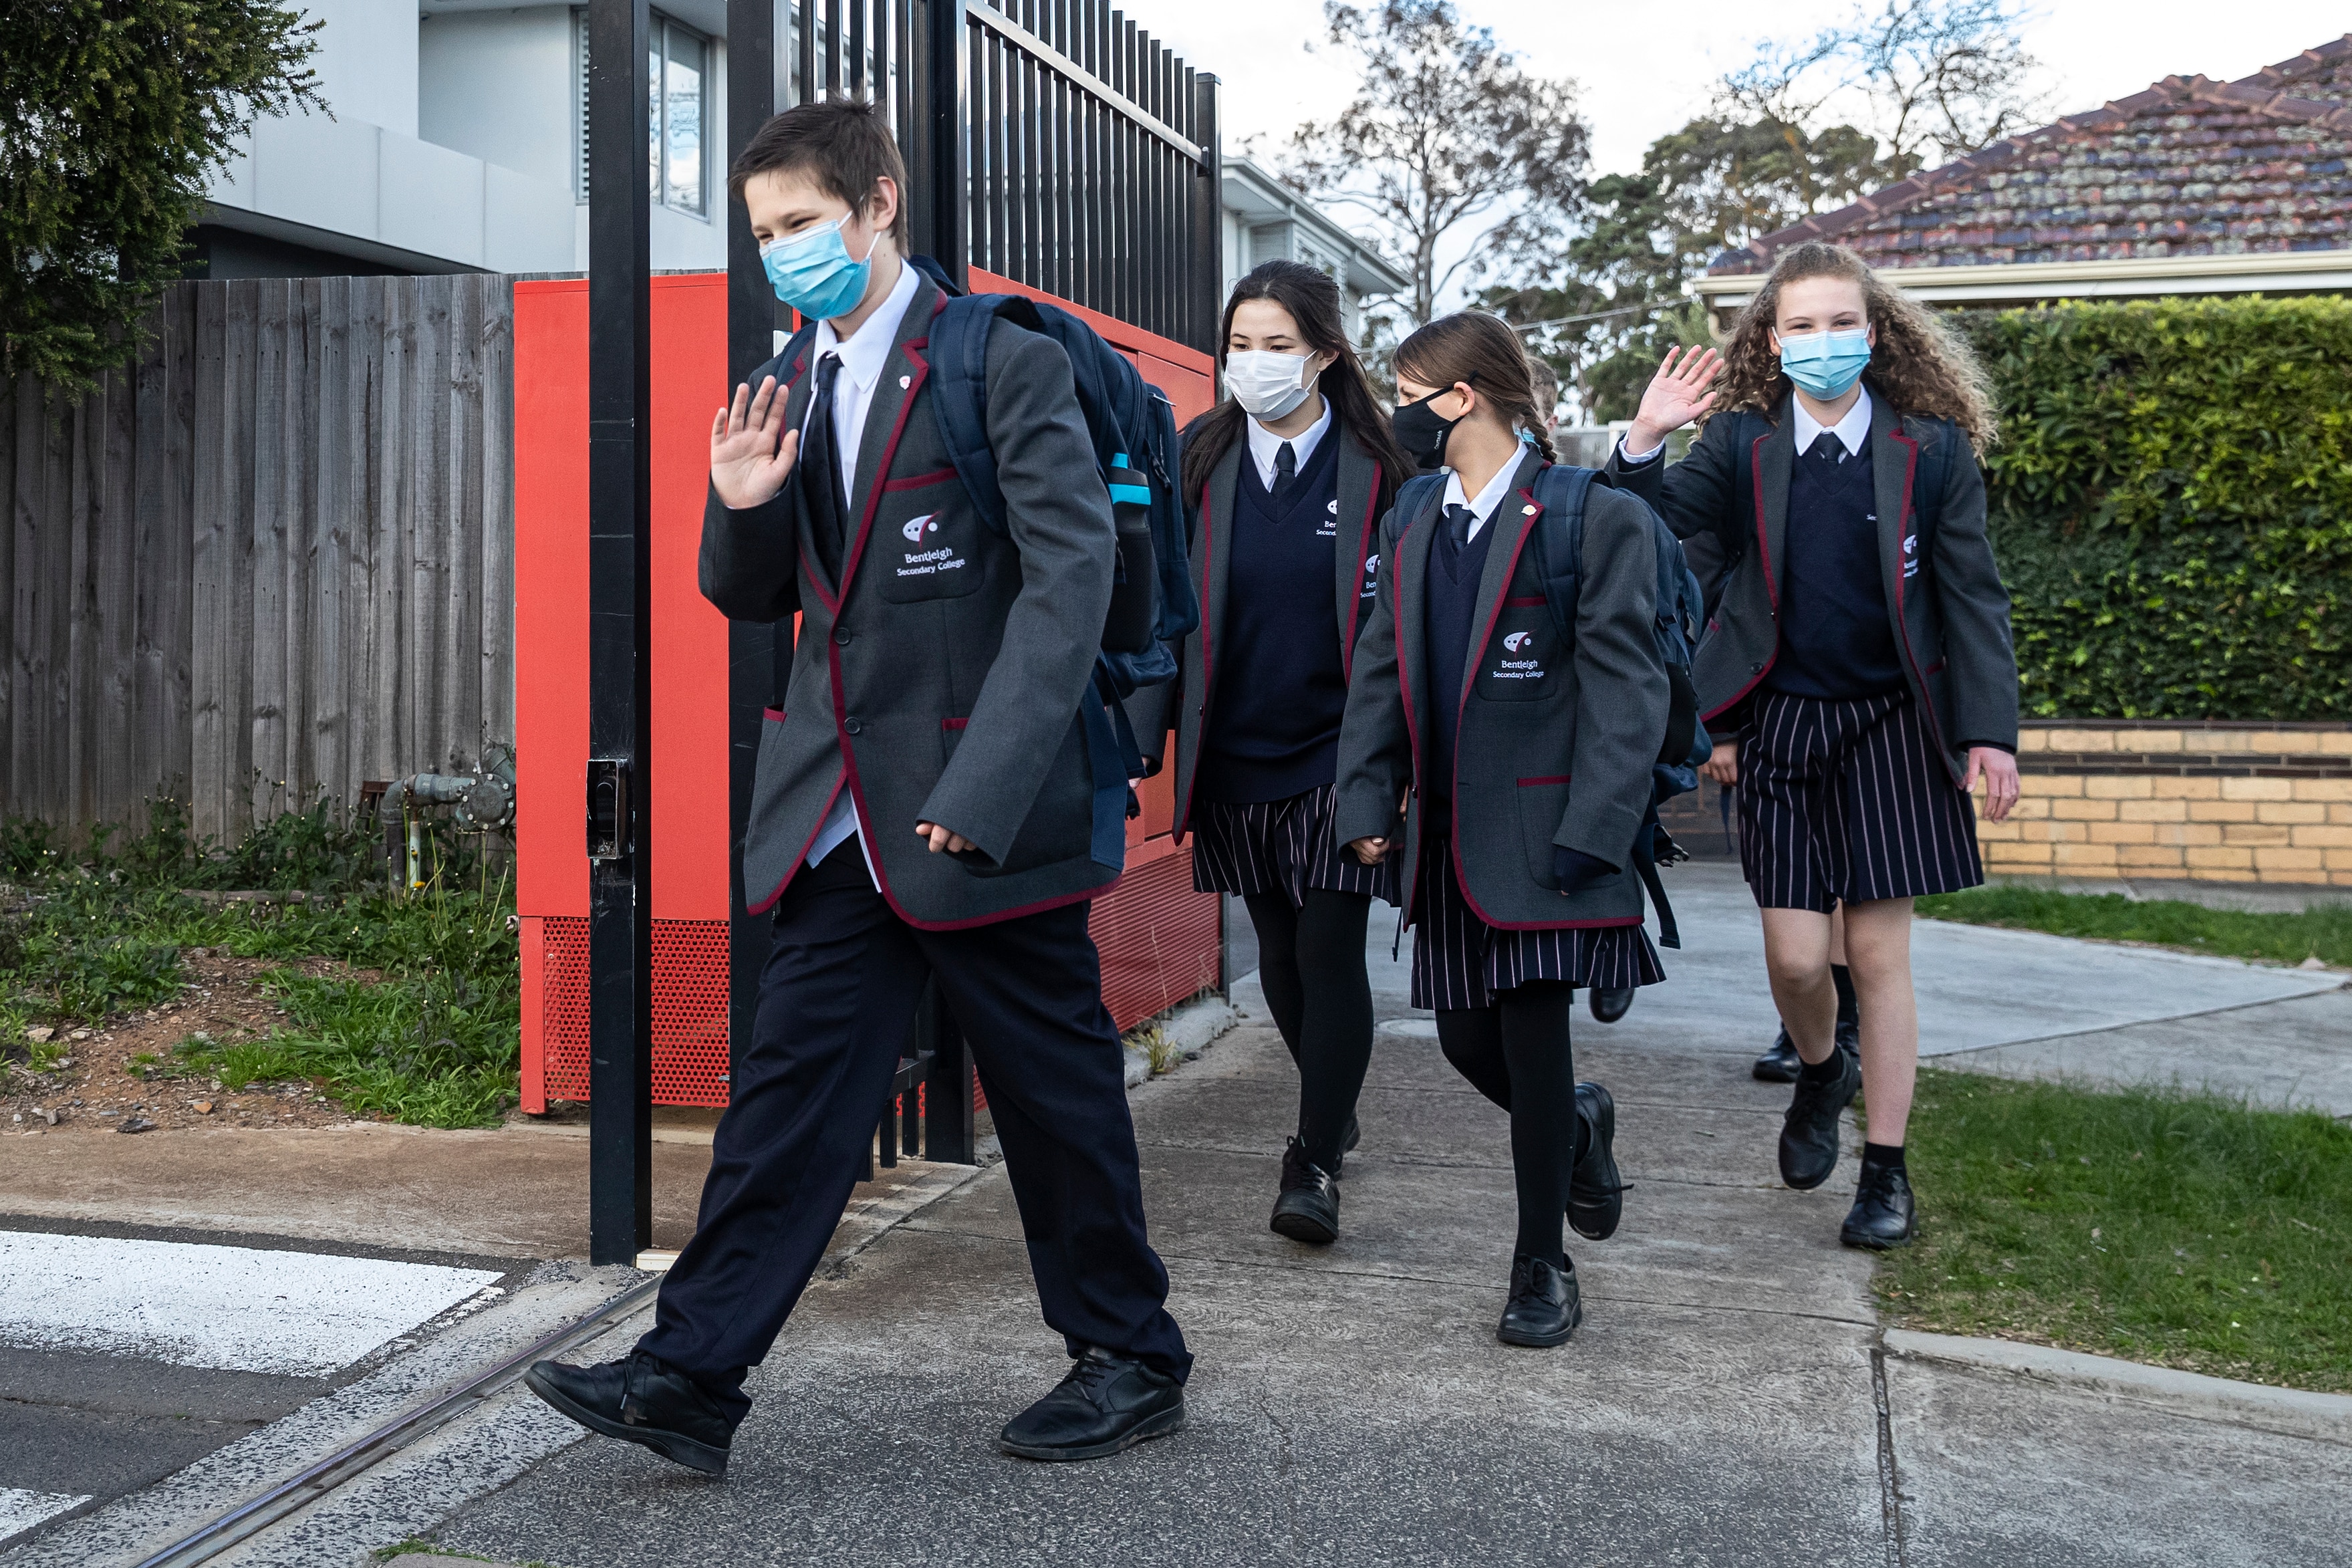 Melbourne students return to school as COVID-19 restrictions are eased across Victoria, July 2021.